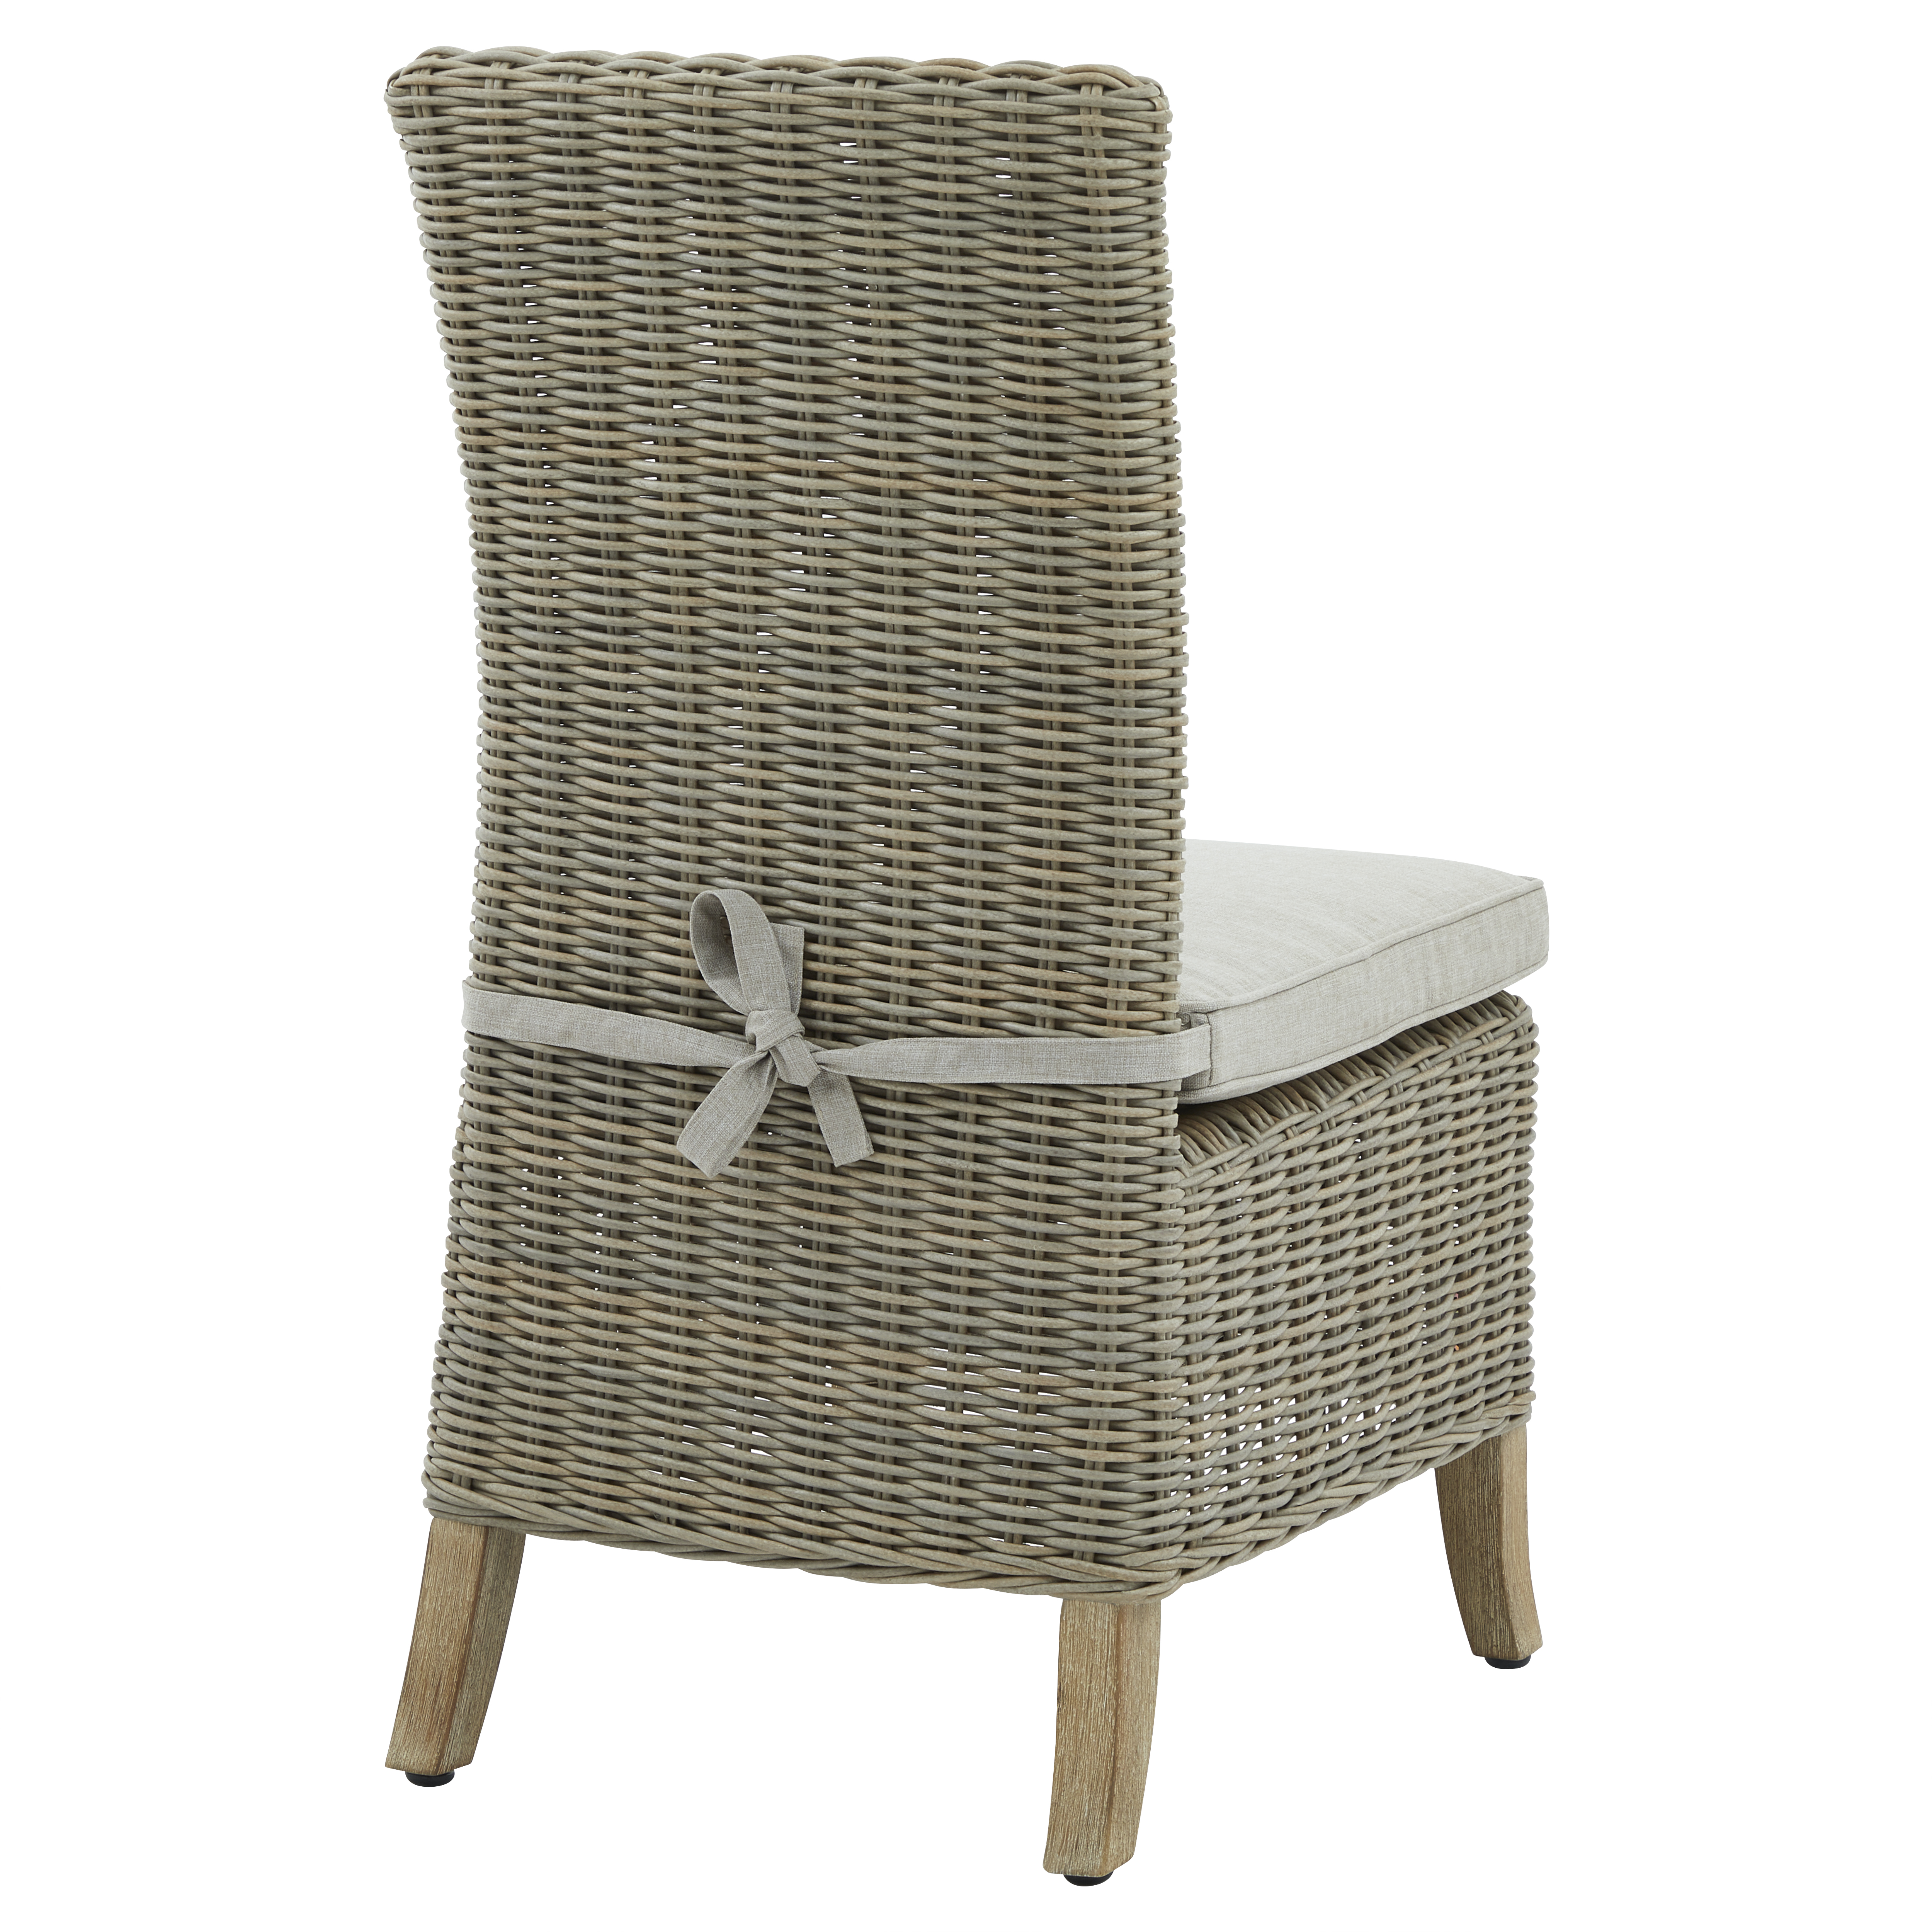 Capri Collection Outdoor Dining Chair - Image 3